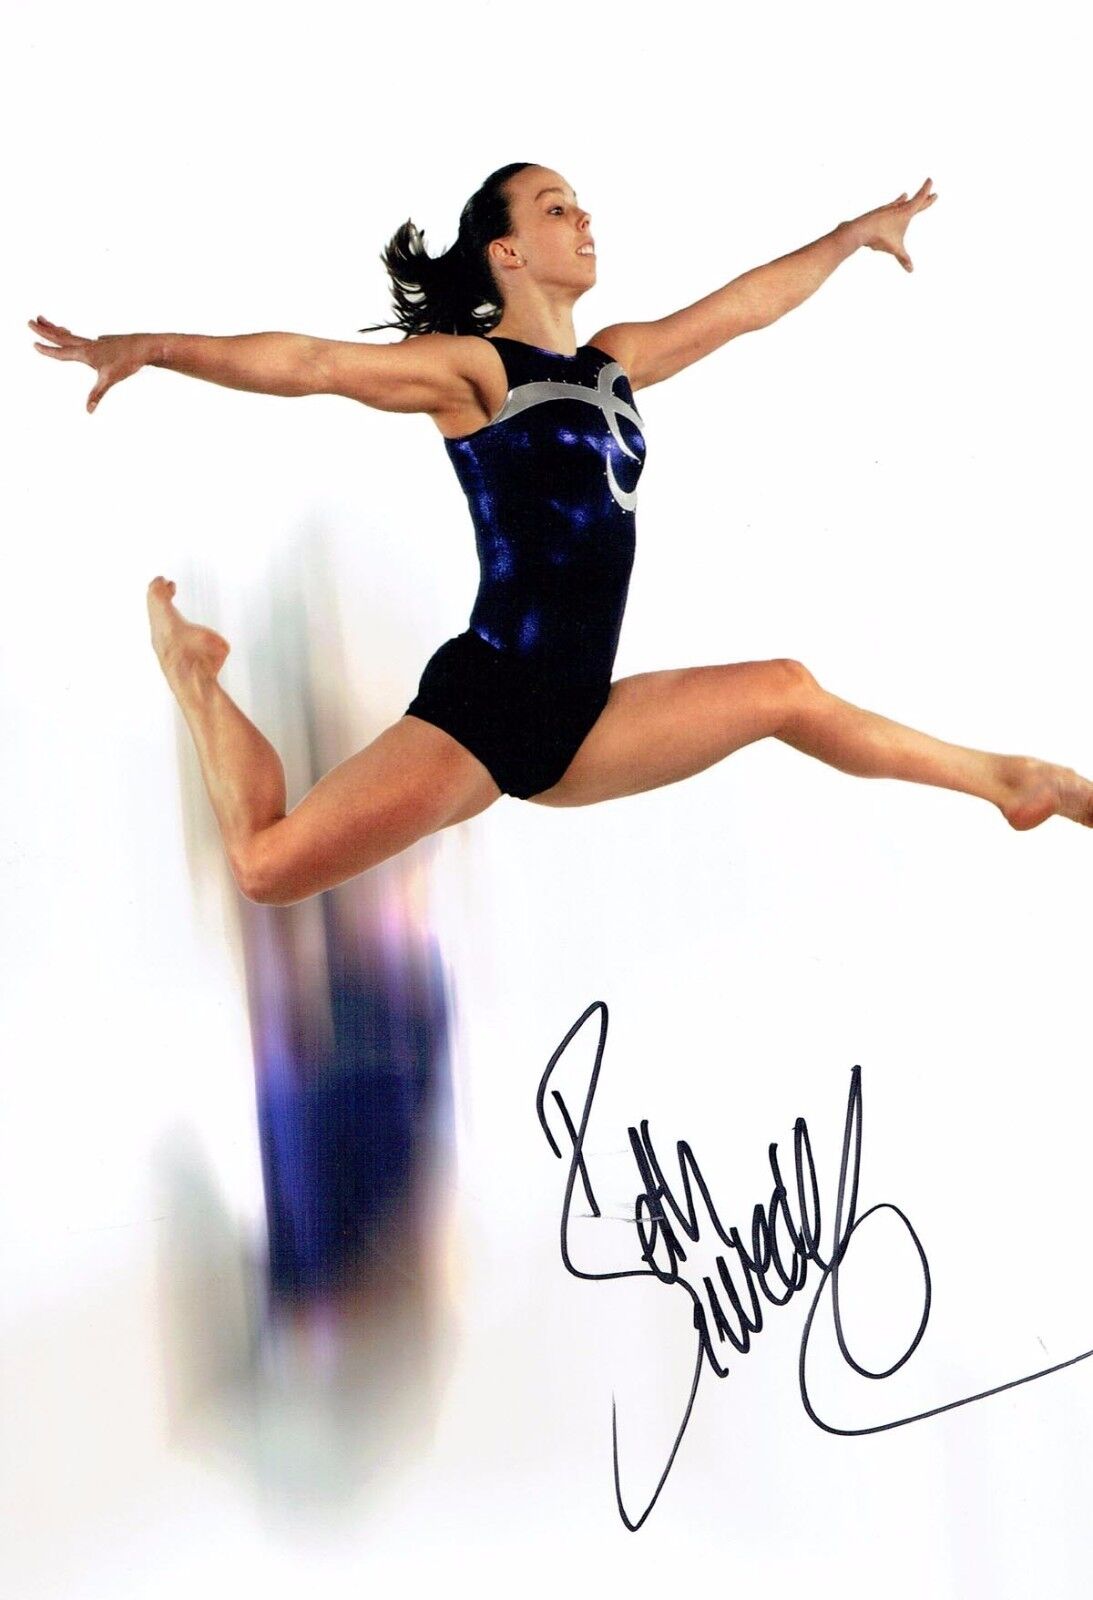 Beth TWEDDLE Autograph 12x8 Signed Photo Poster painting 1 AFTAL COA British Olympic Gymnast